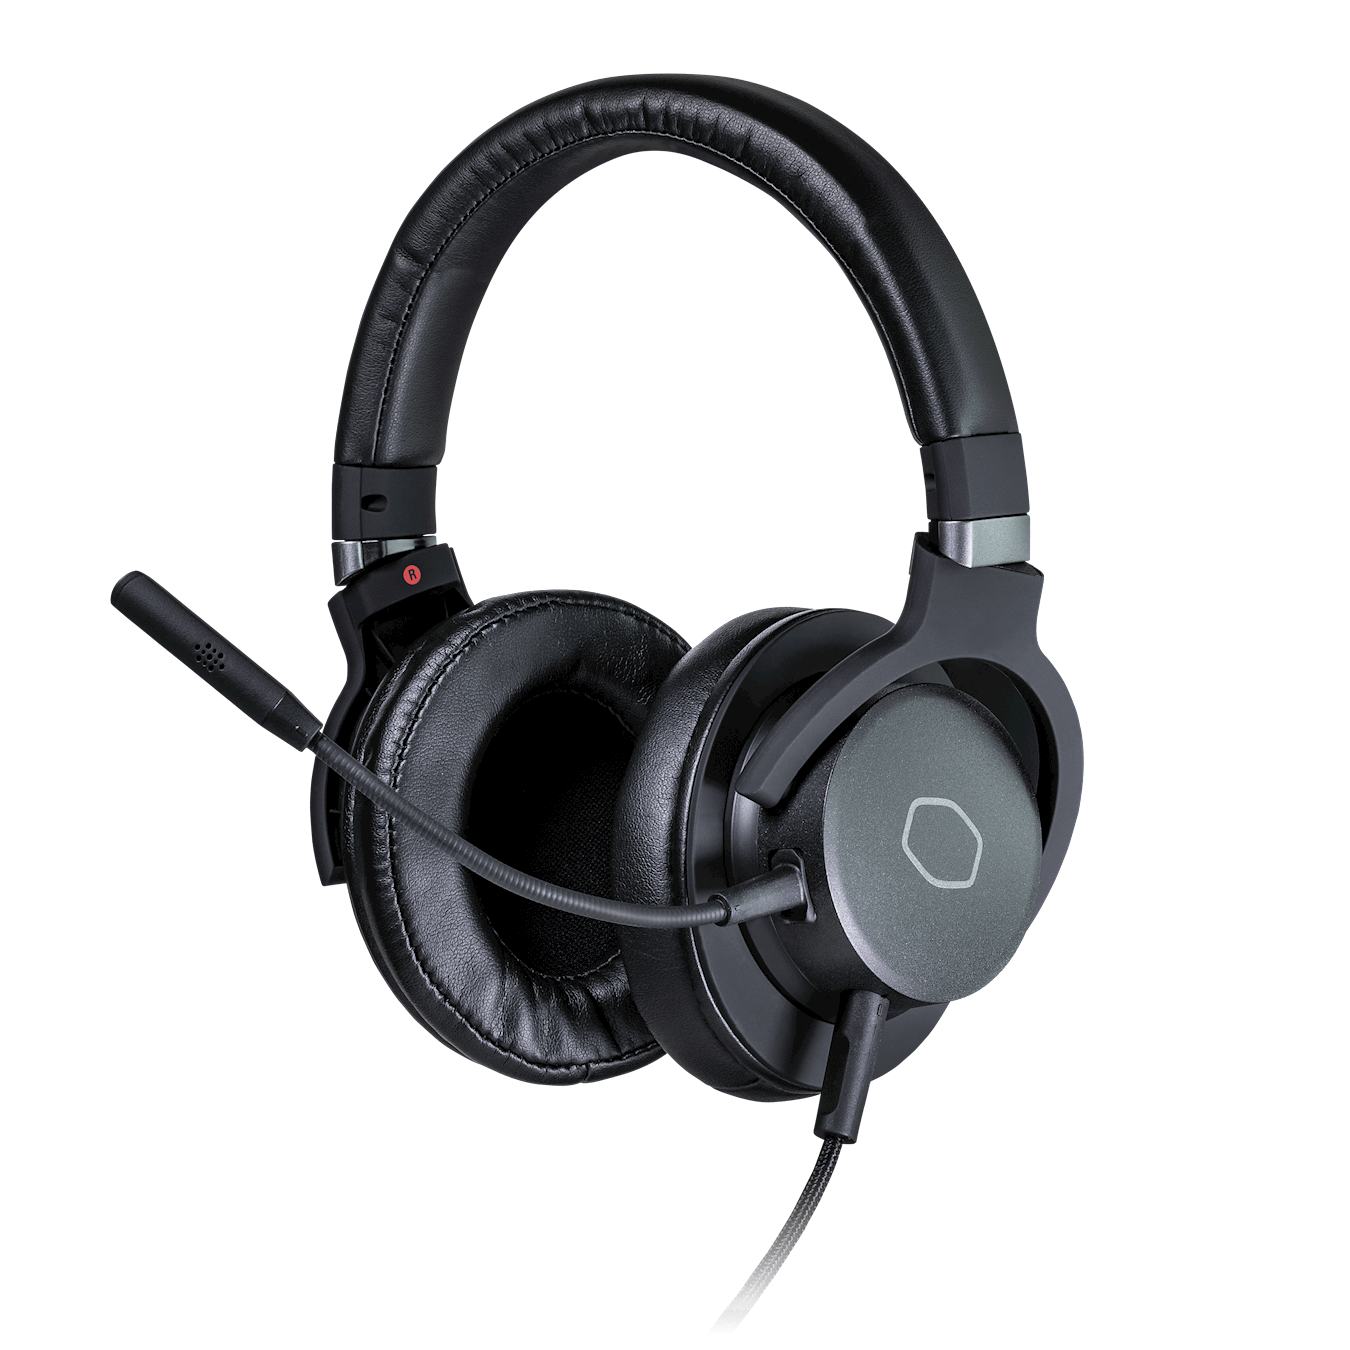 MH752 - is a premium gaming headset with an emphasis on comfort